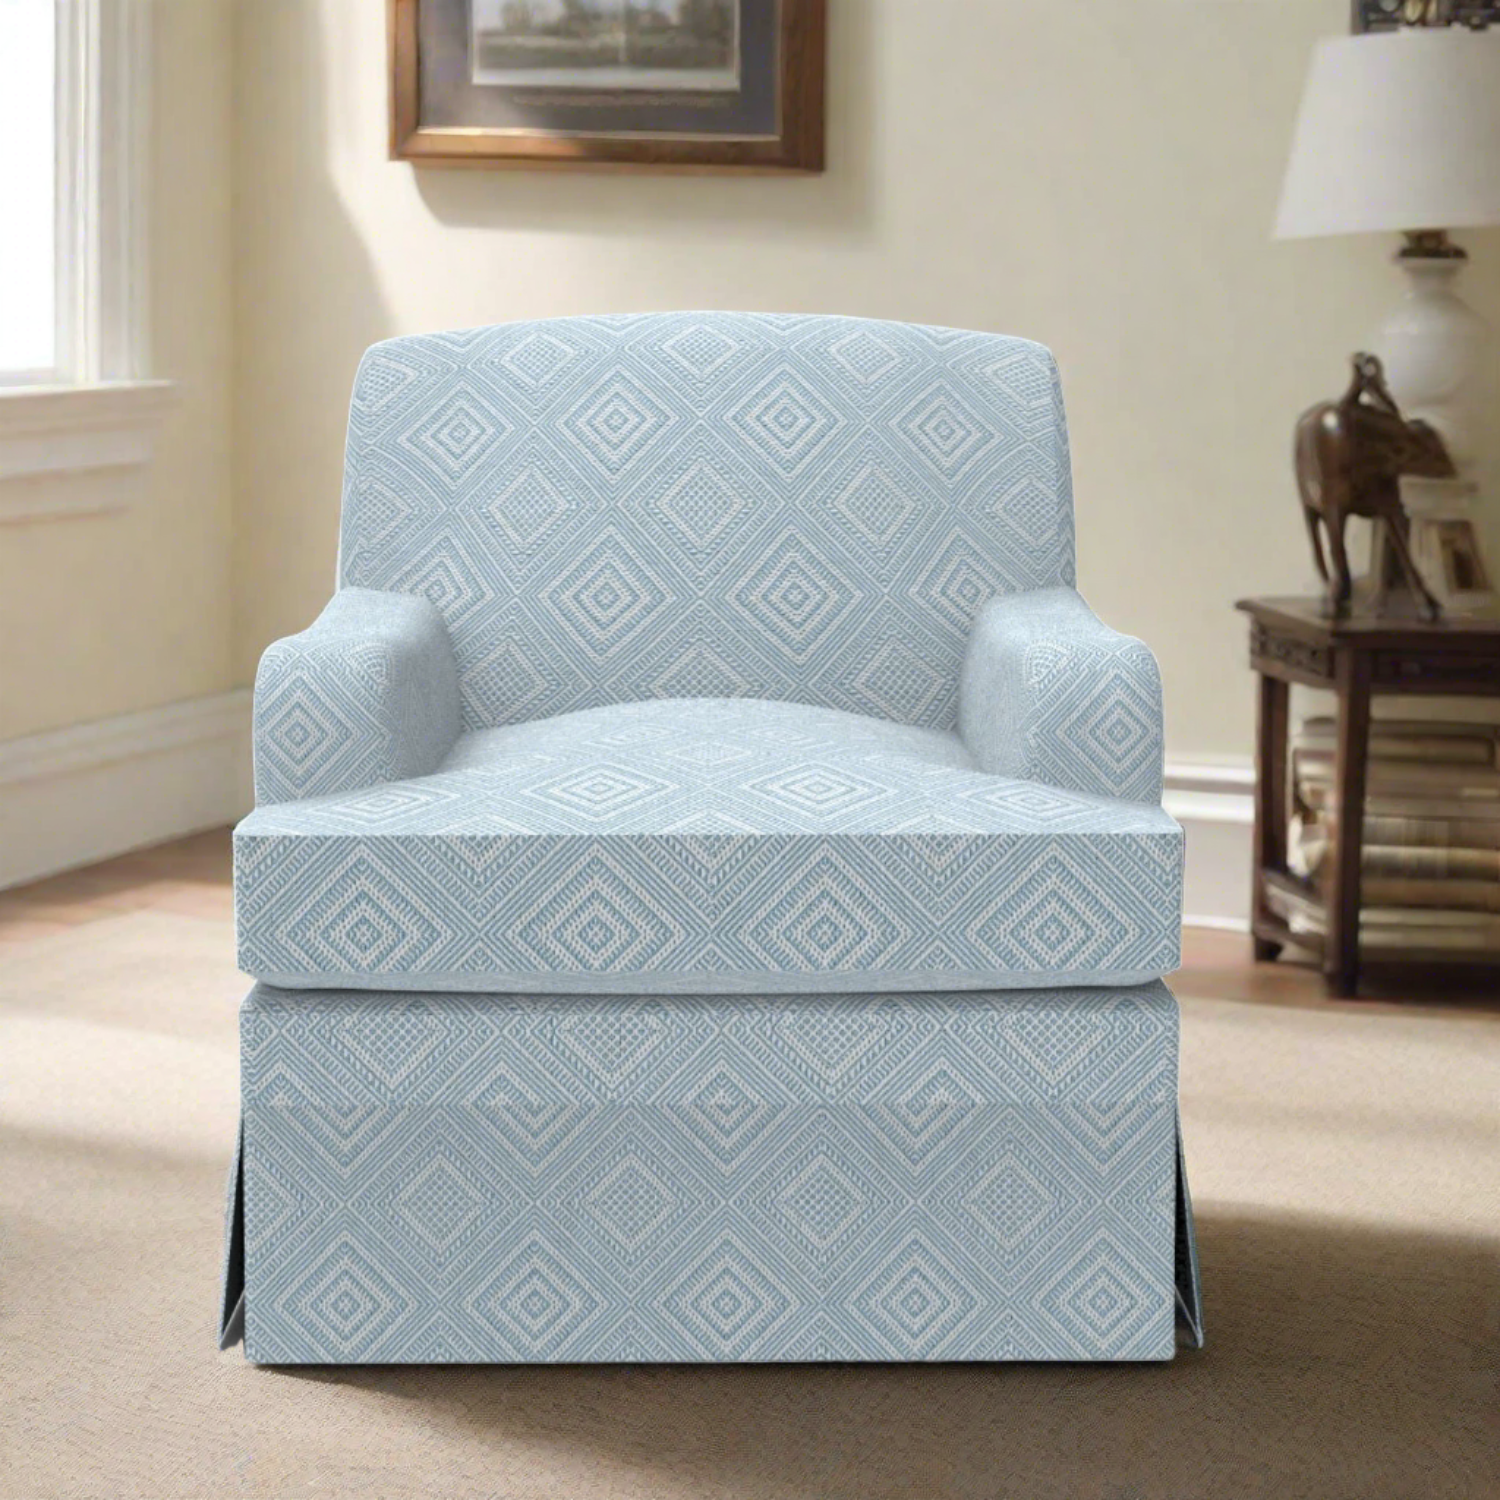 Stratford Slipcovered Armchair with Skirt